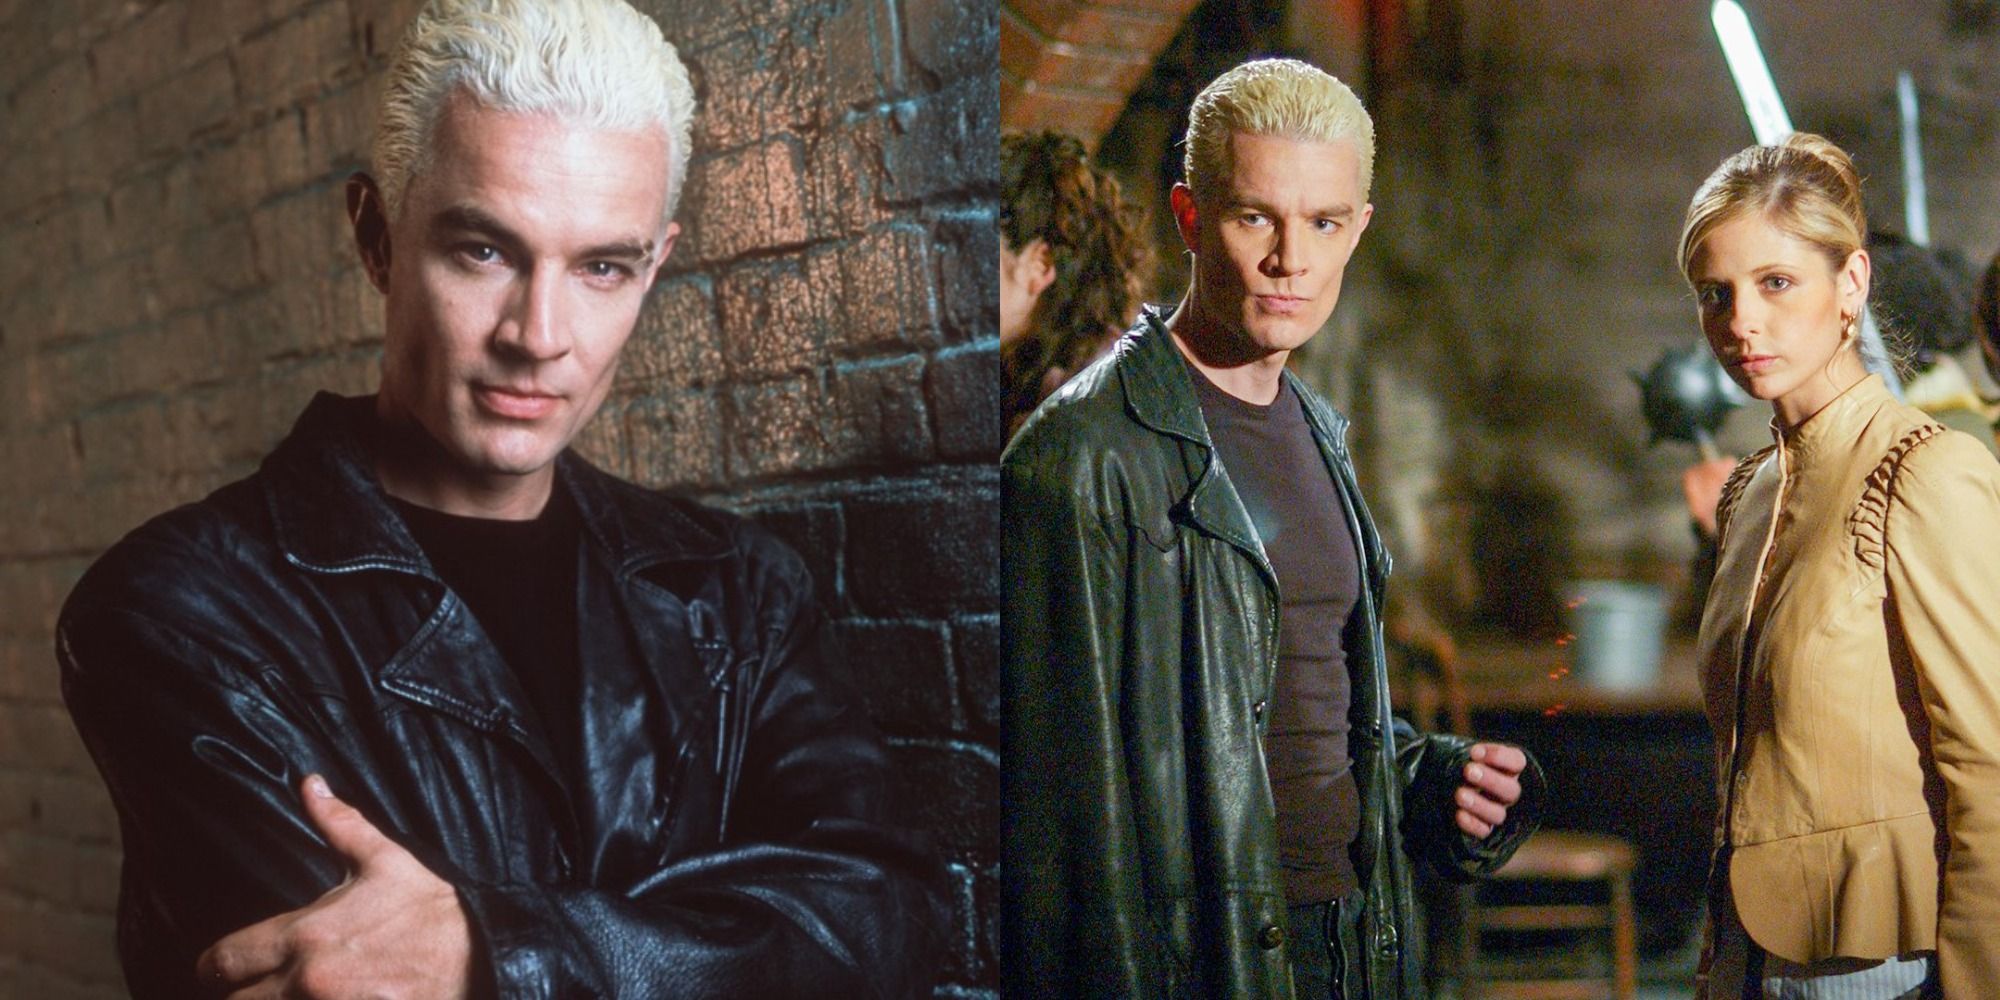 10 Harsh Realities About Spike's Character In Buffy The Vampire Slayer